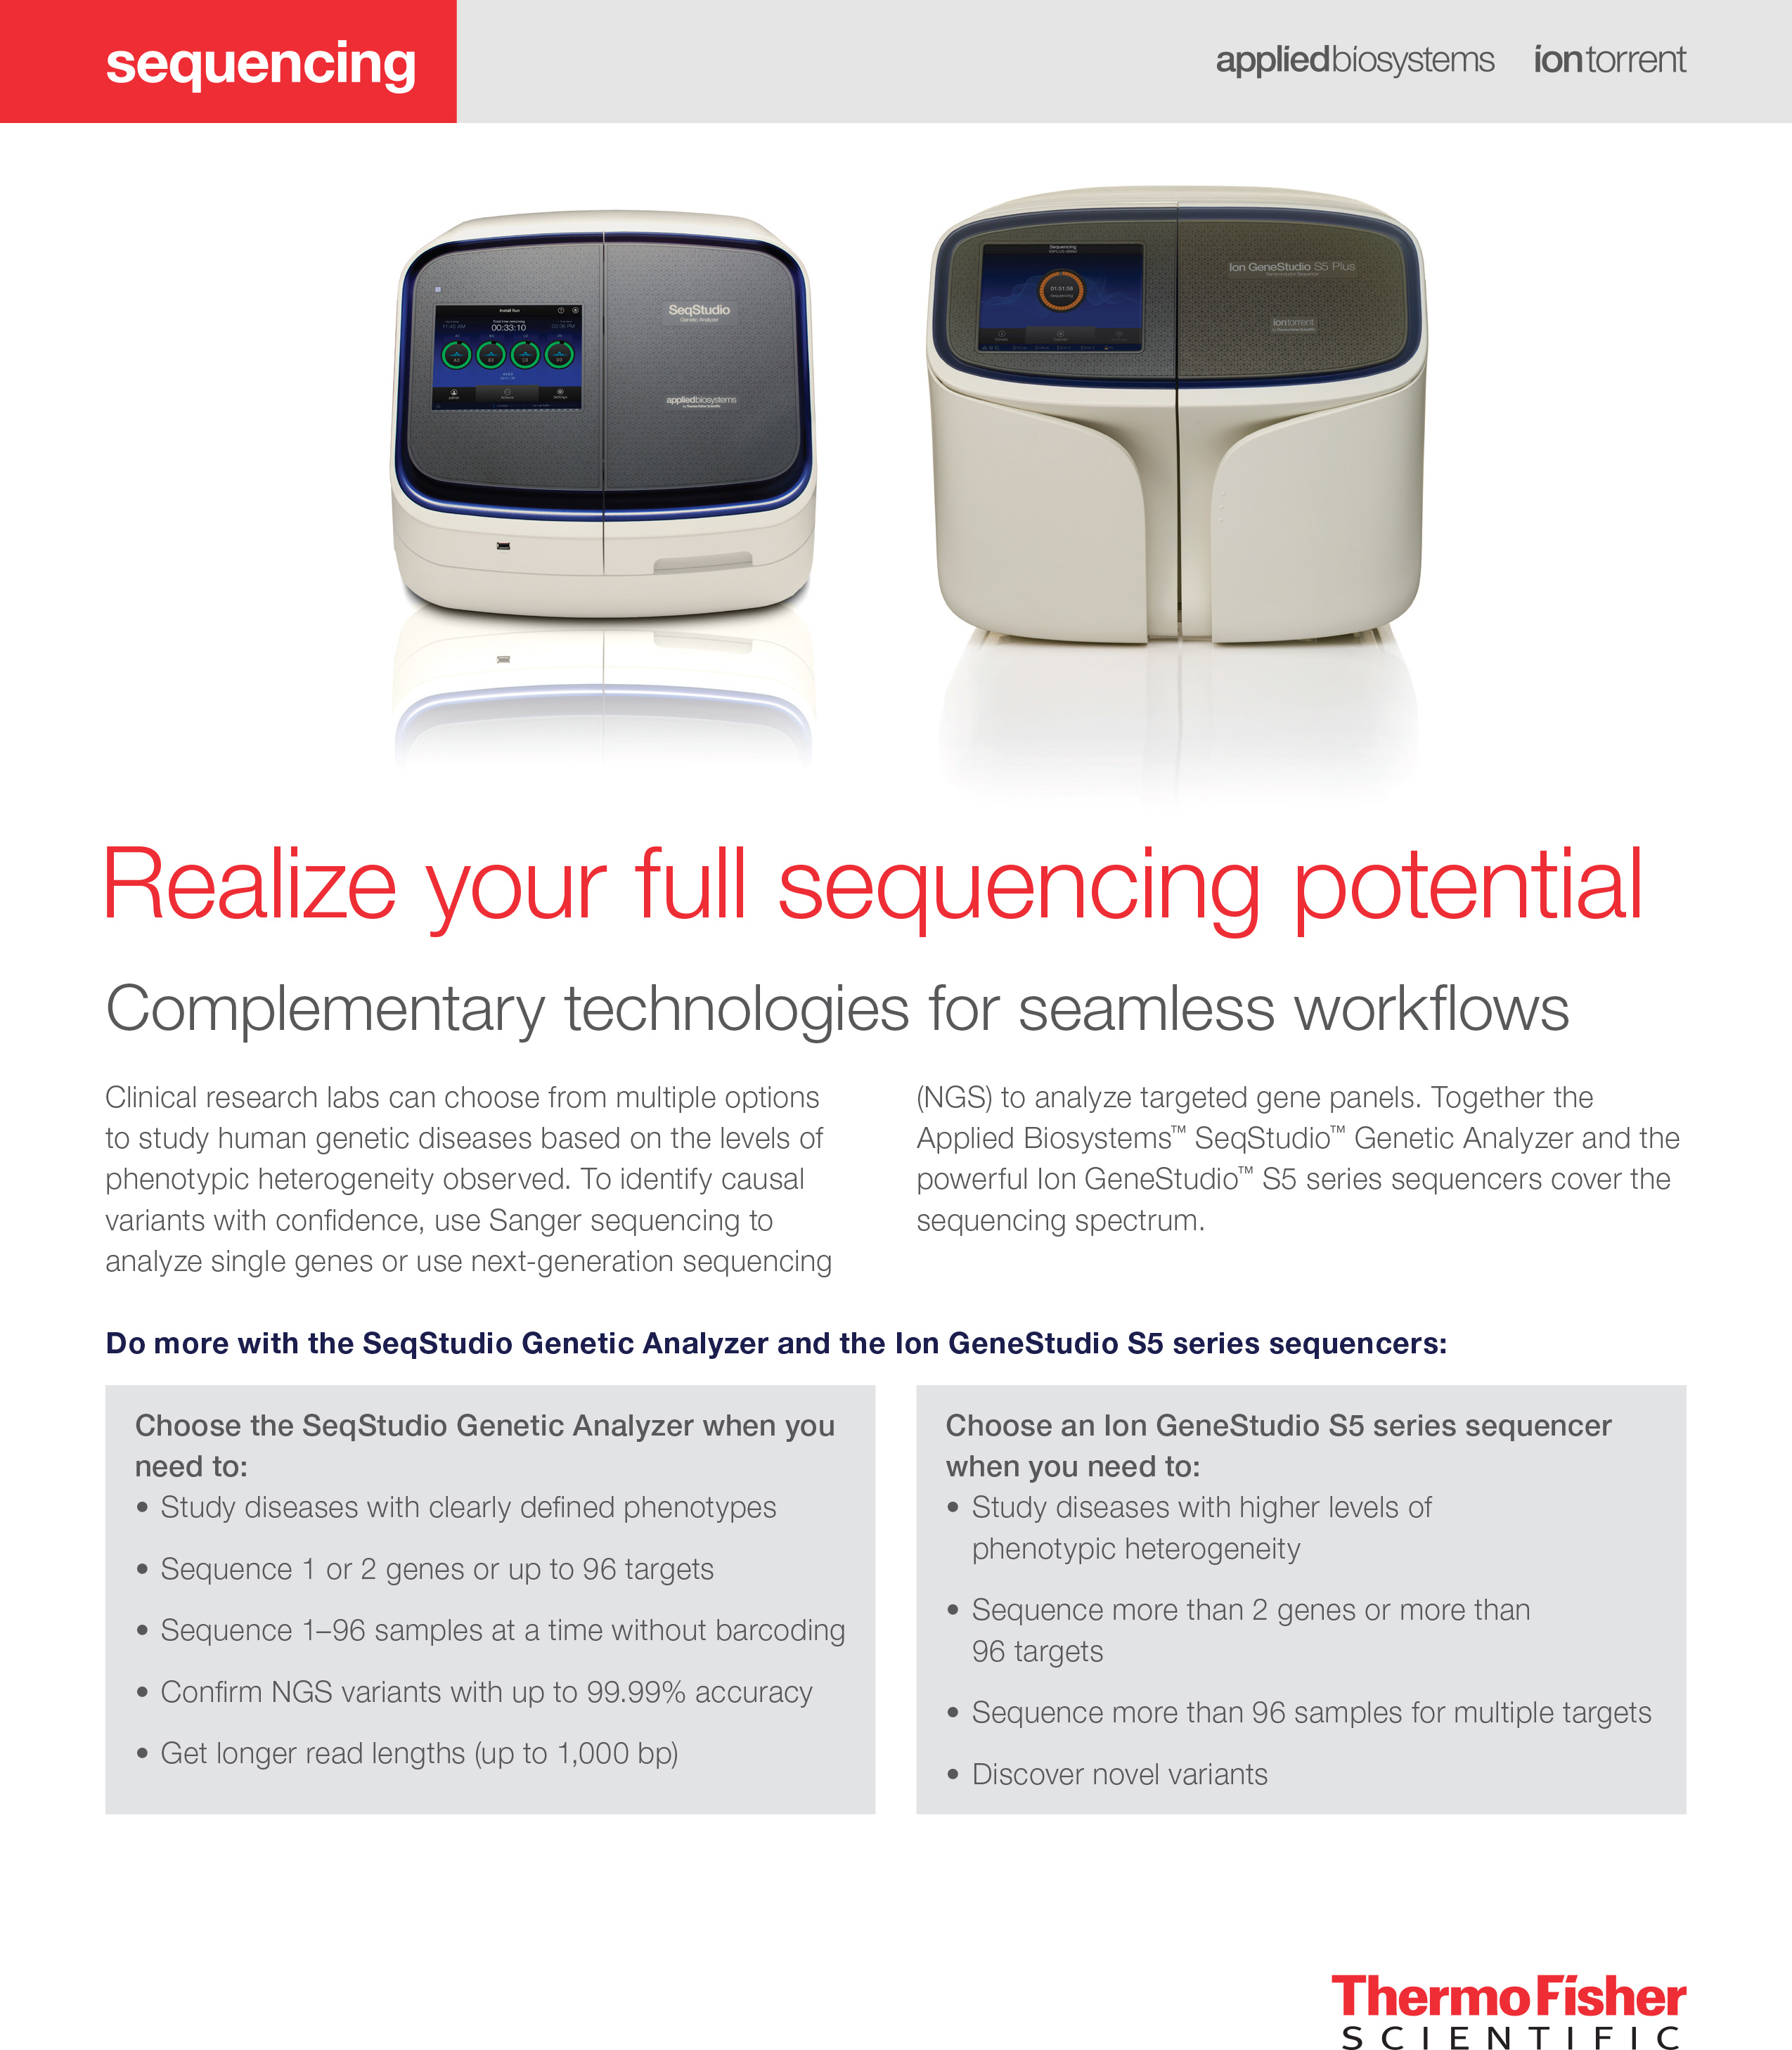 Realize your full sequencing potential